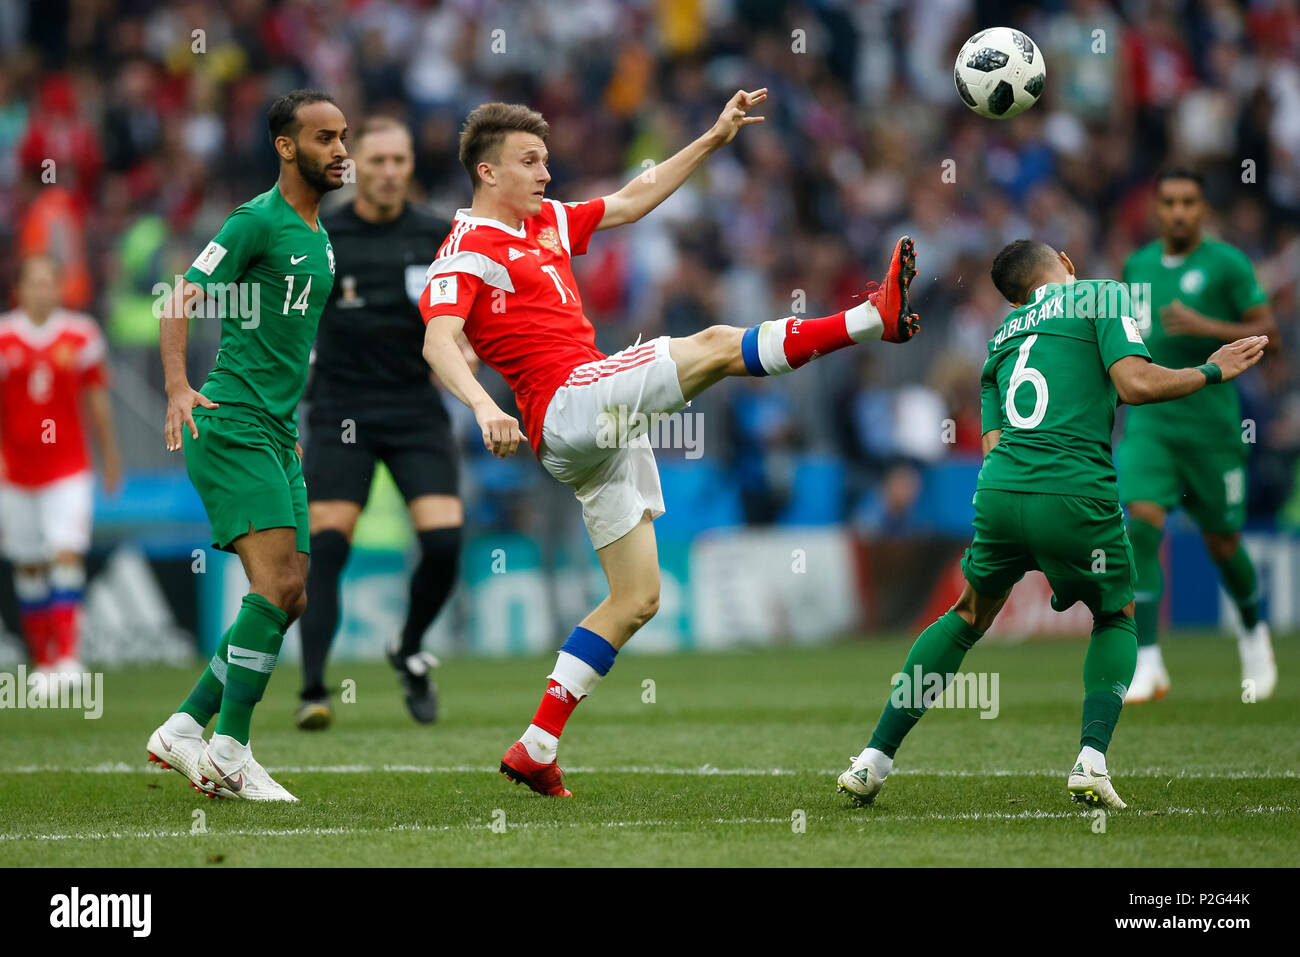 Moscow, Russia. 14th June 2018. Abdullah Otayf of Saudi Arabia, Aleksandr Golovin of Russia and Mohammed Al-Breik of Saudi Arabia during the 2018 FIFA World Cup Group A match between Russia and Saudi Arabia at Luzhniki Stadium on June 14th 2018 in Moscow, Russia. Credit: PHC Images/Alamy Live News Stock Photo